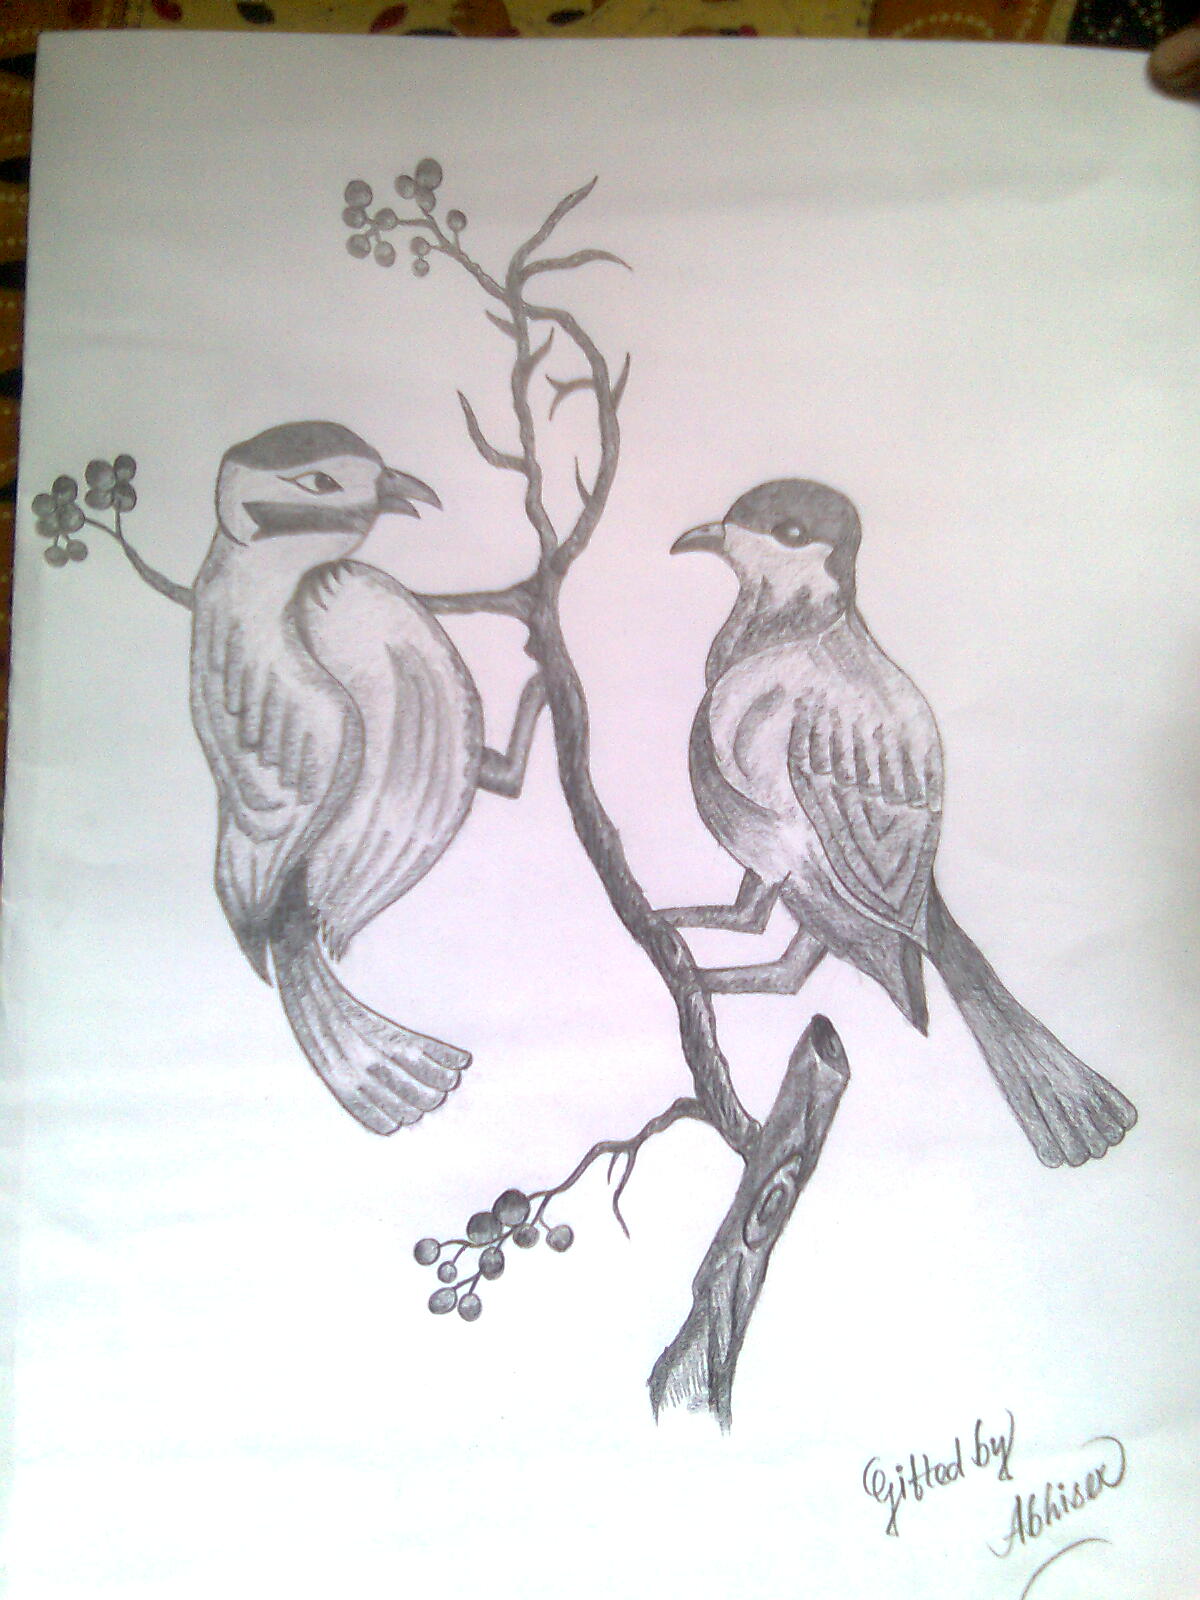 Love Birds Pencil Sketch Images Pencildrawing2019 Explore & discover the best and the most inspiring art & drawings ideas & trends from all around the world. pencildrawing2019